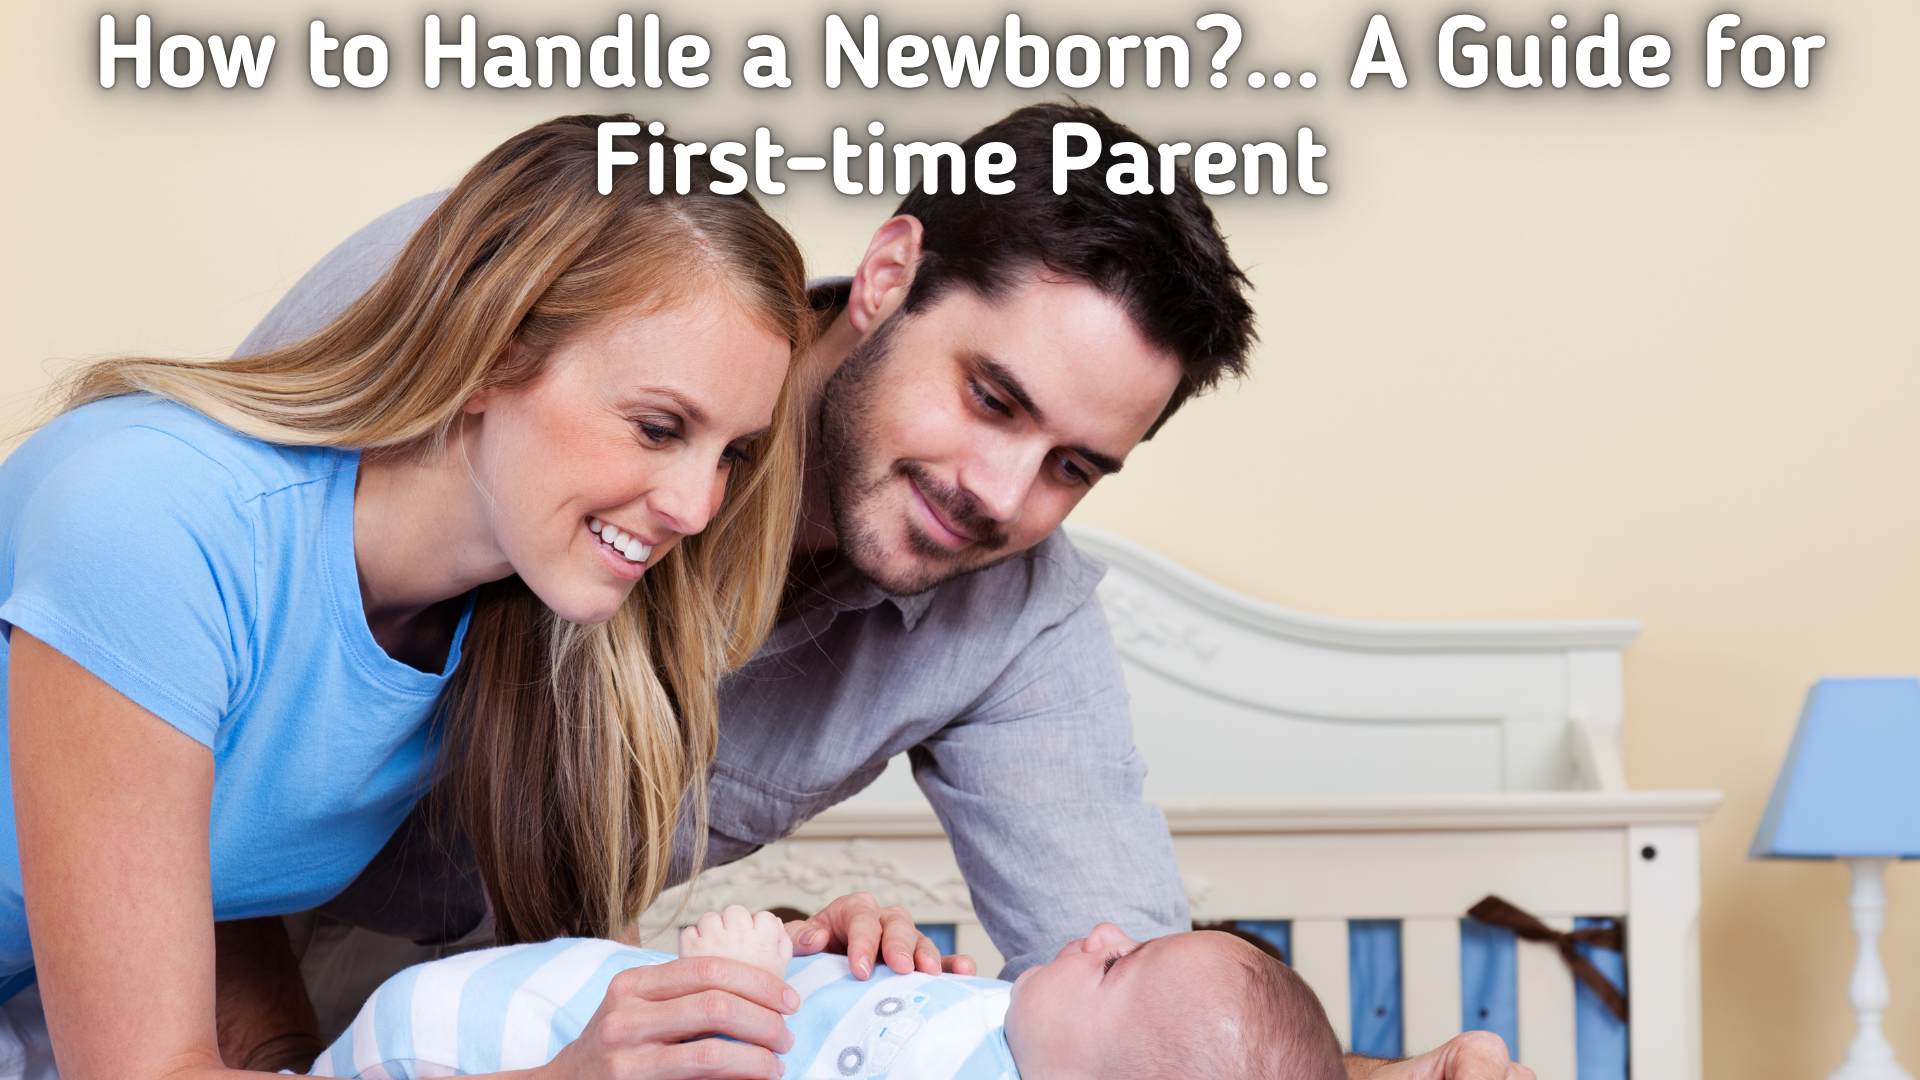 How to Handle a Newborn?... A Guide for First-time Parent!